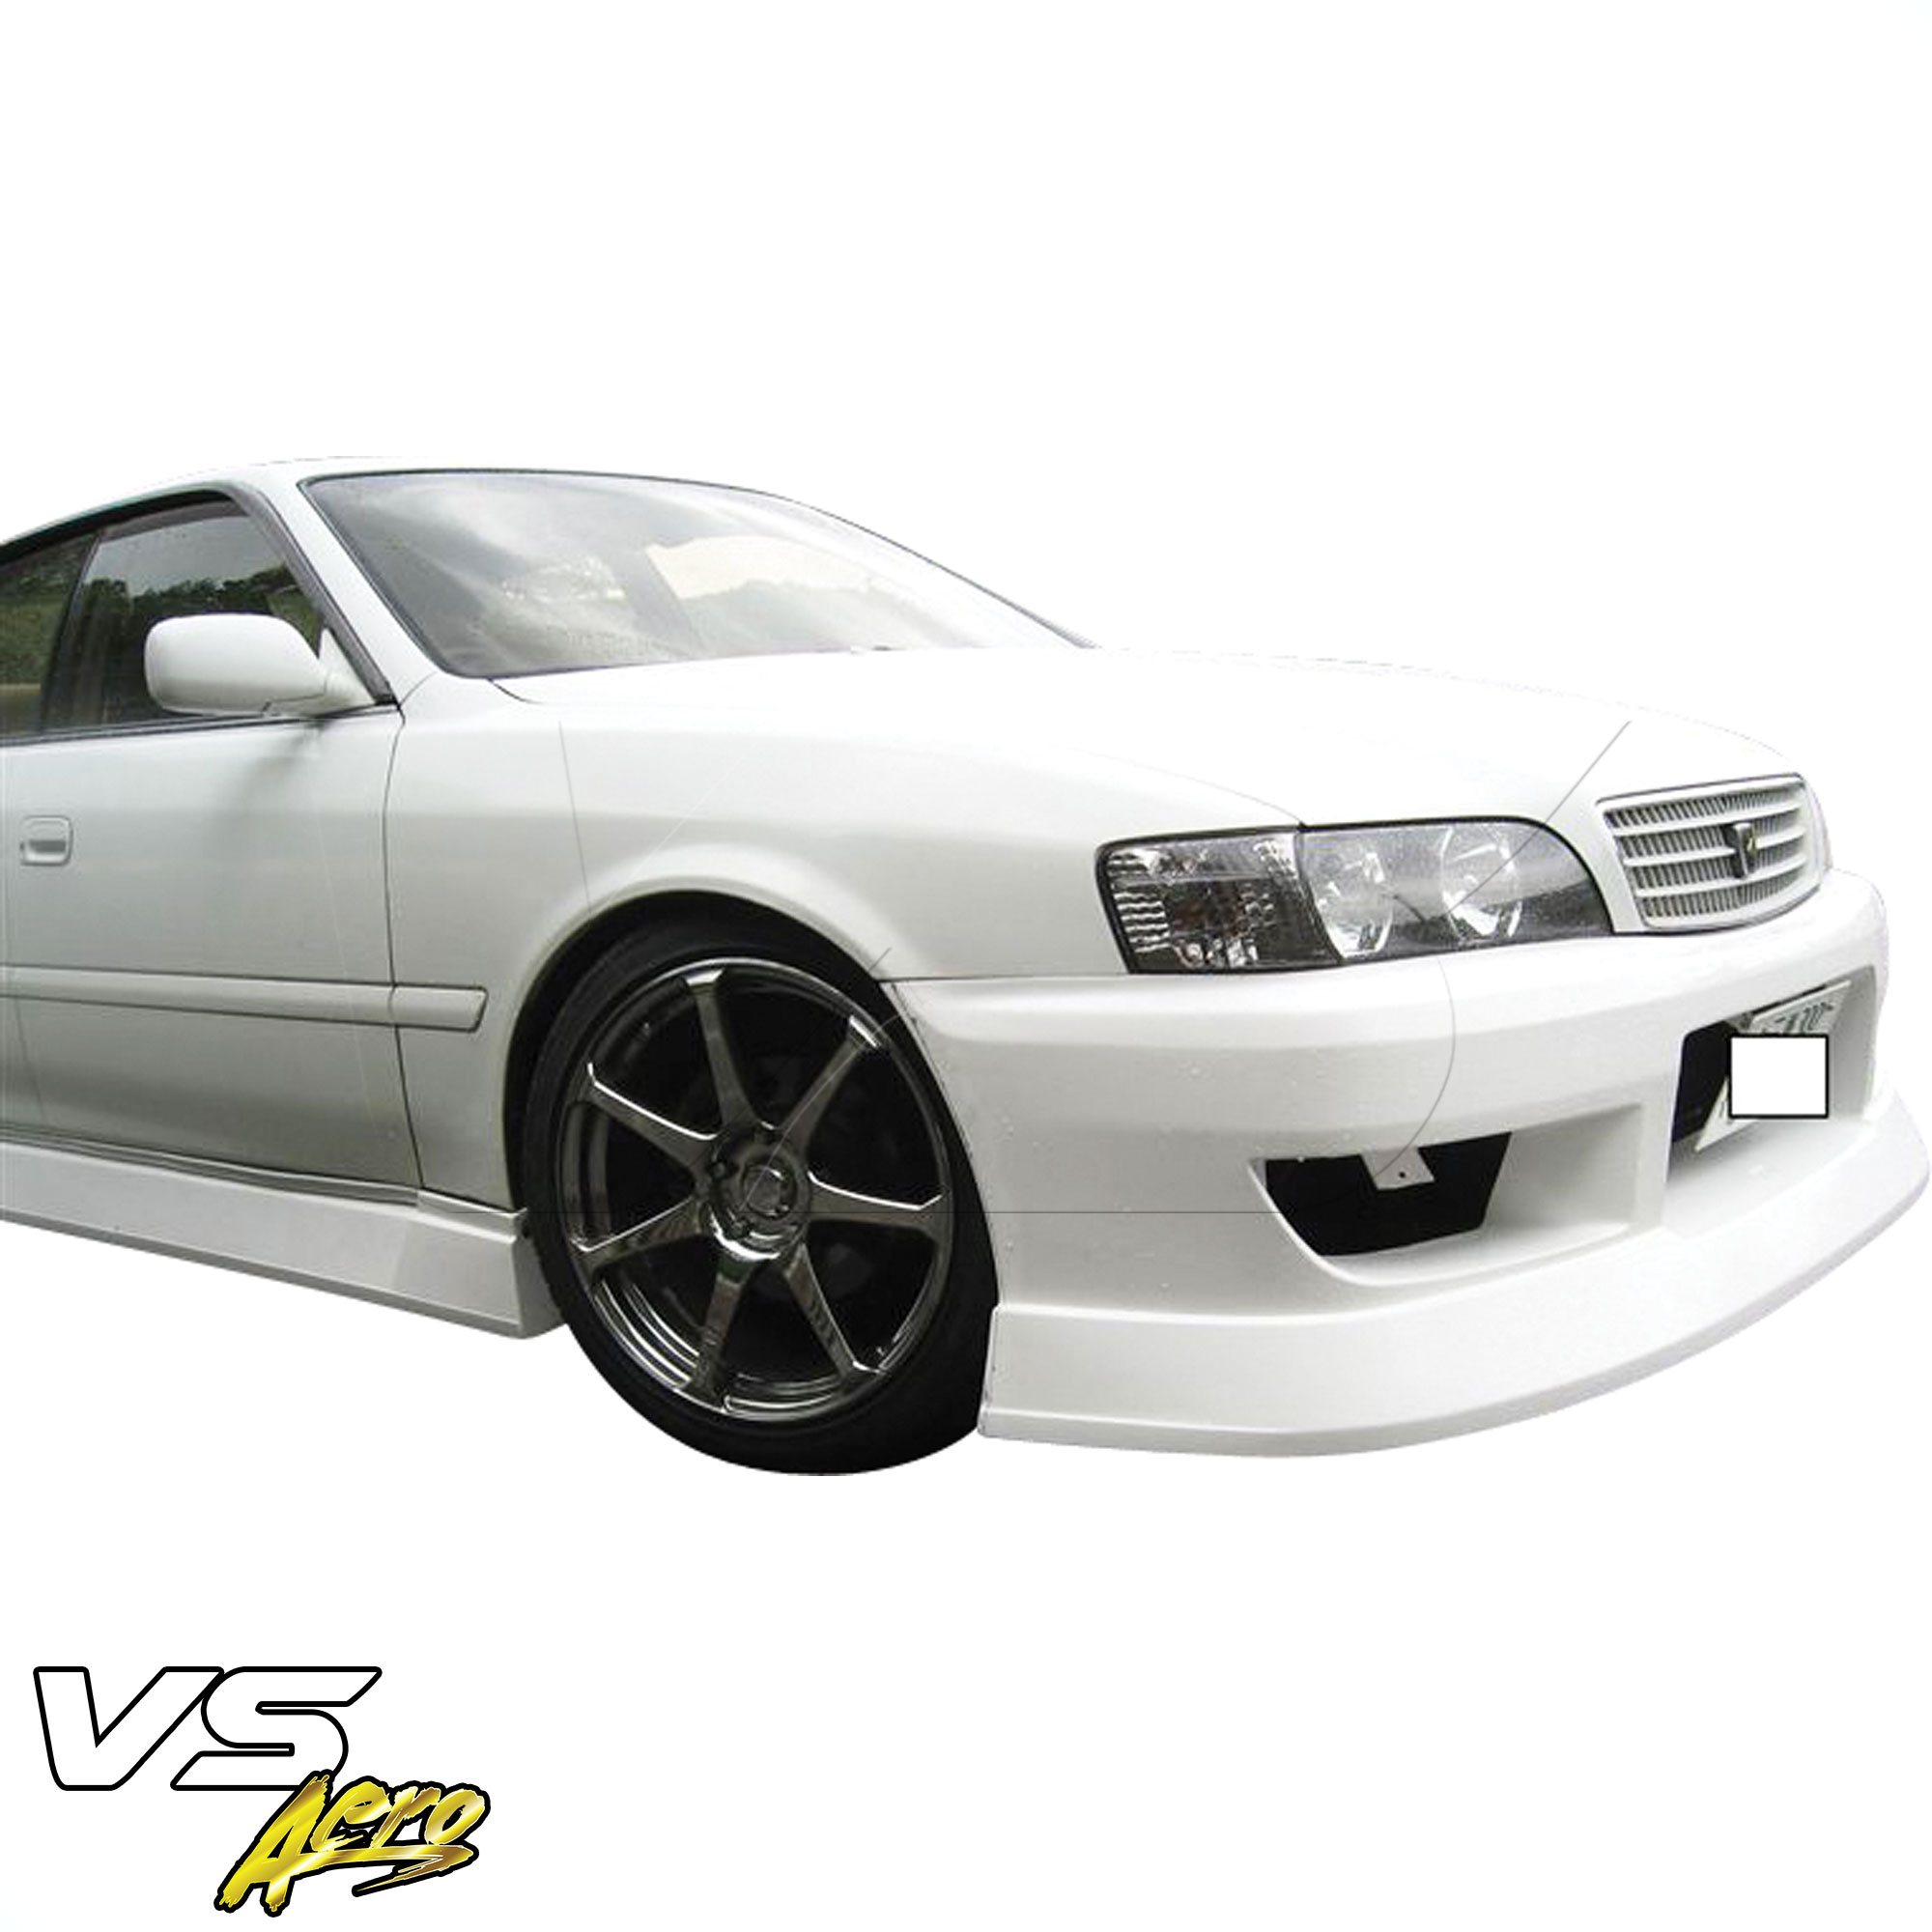 VSaero FRP BSPO Front Bumper > Toyota Chaser JZX100 1996-2000 - Image 8